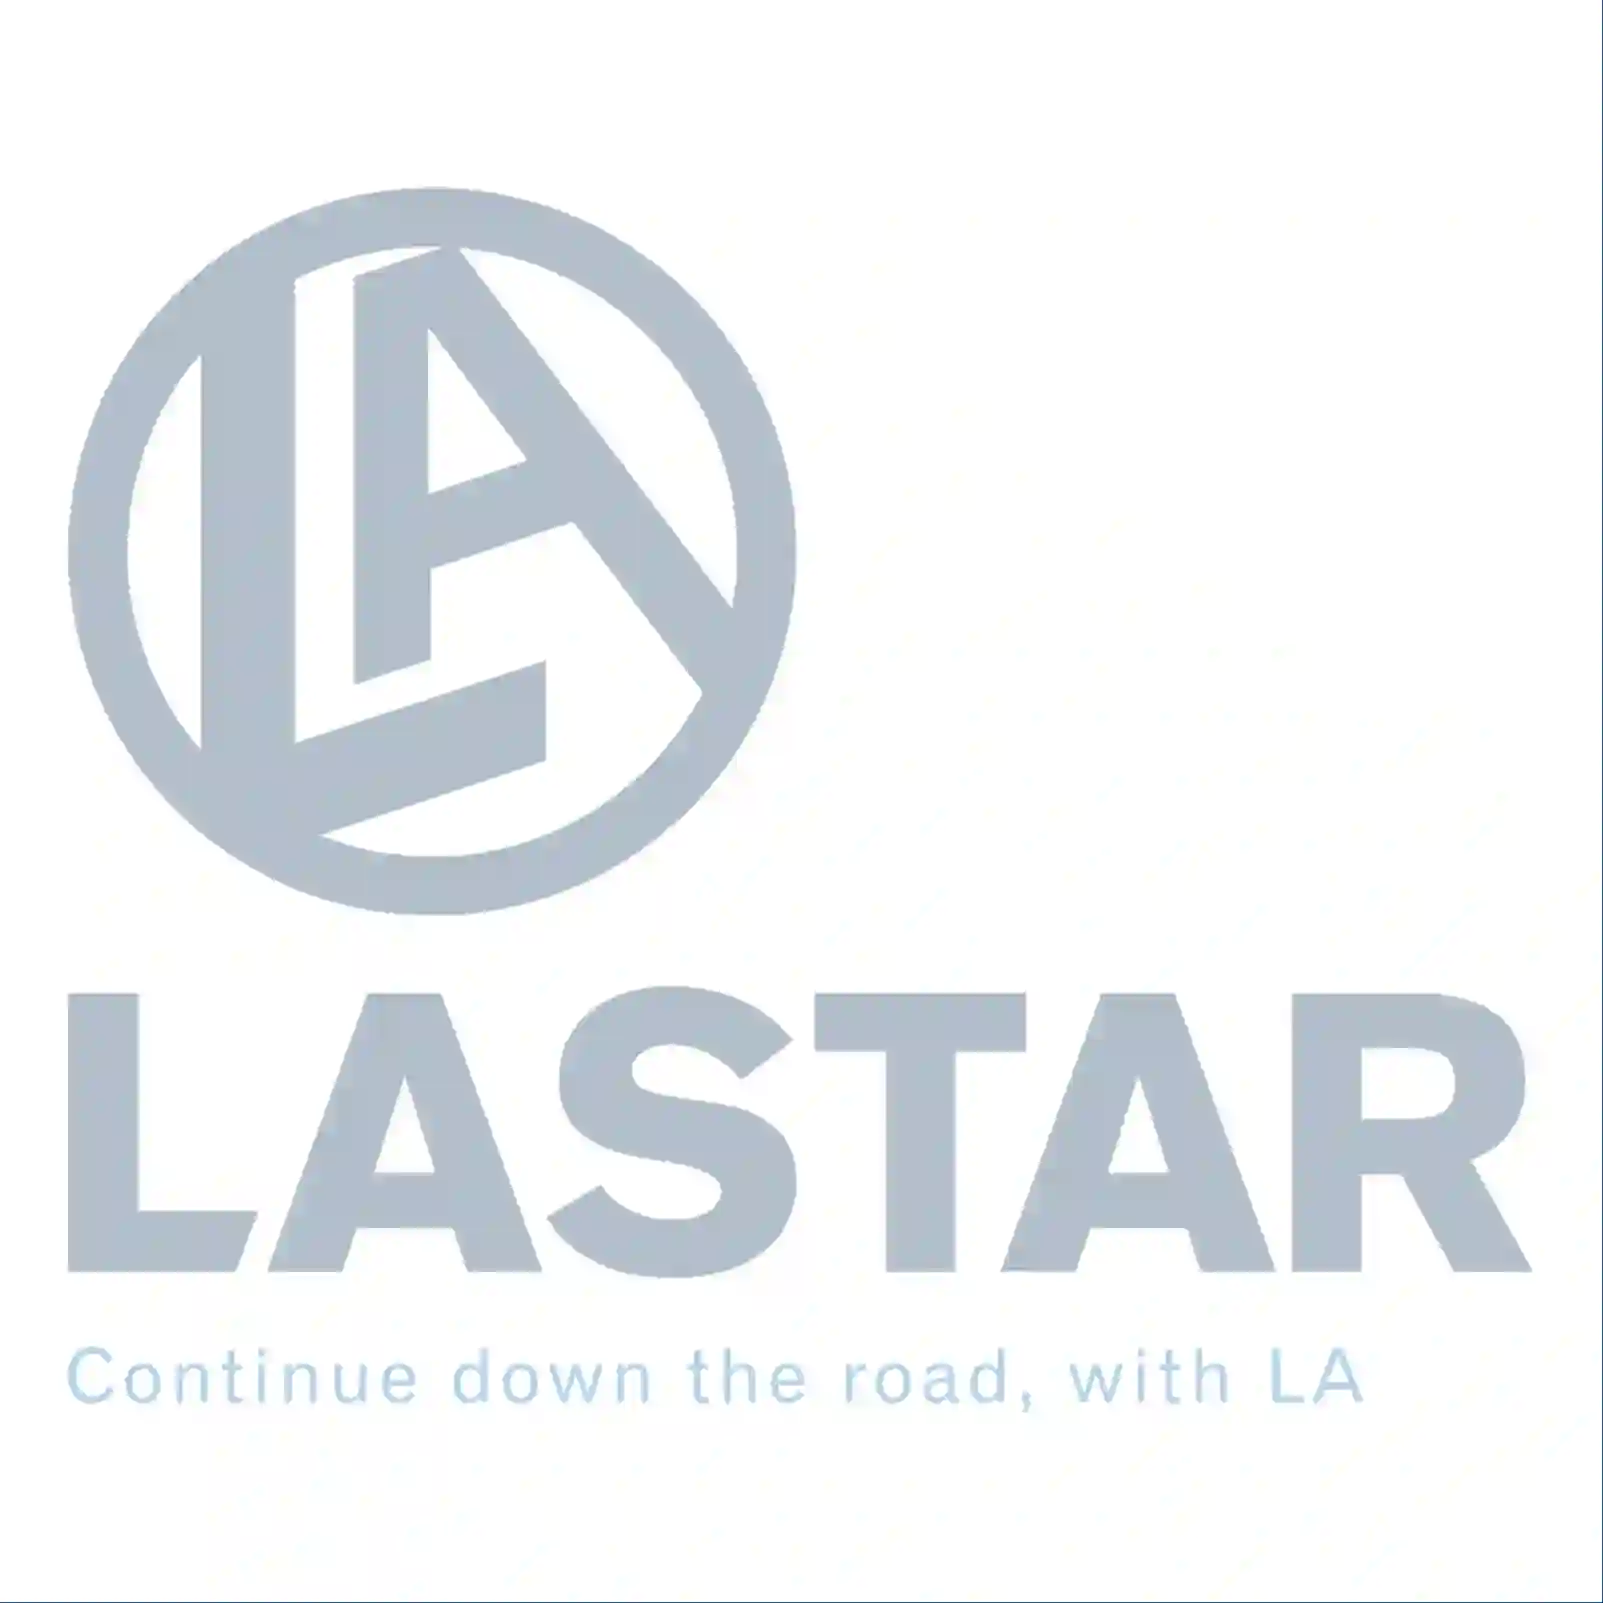  Work lamp, yellow || Lastar Spare Part | Truck Spare Parts, Auotomotive Spare Parts